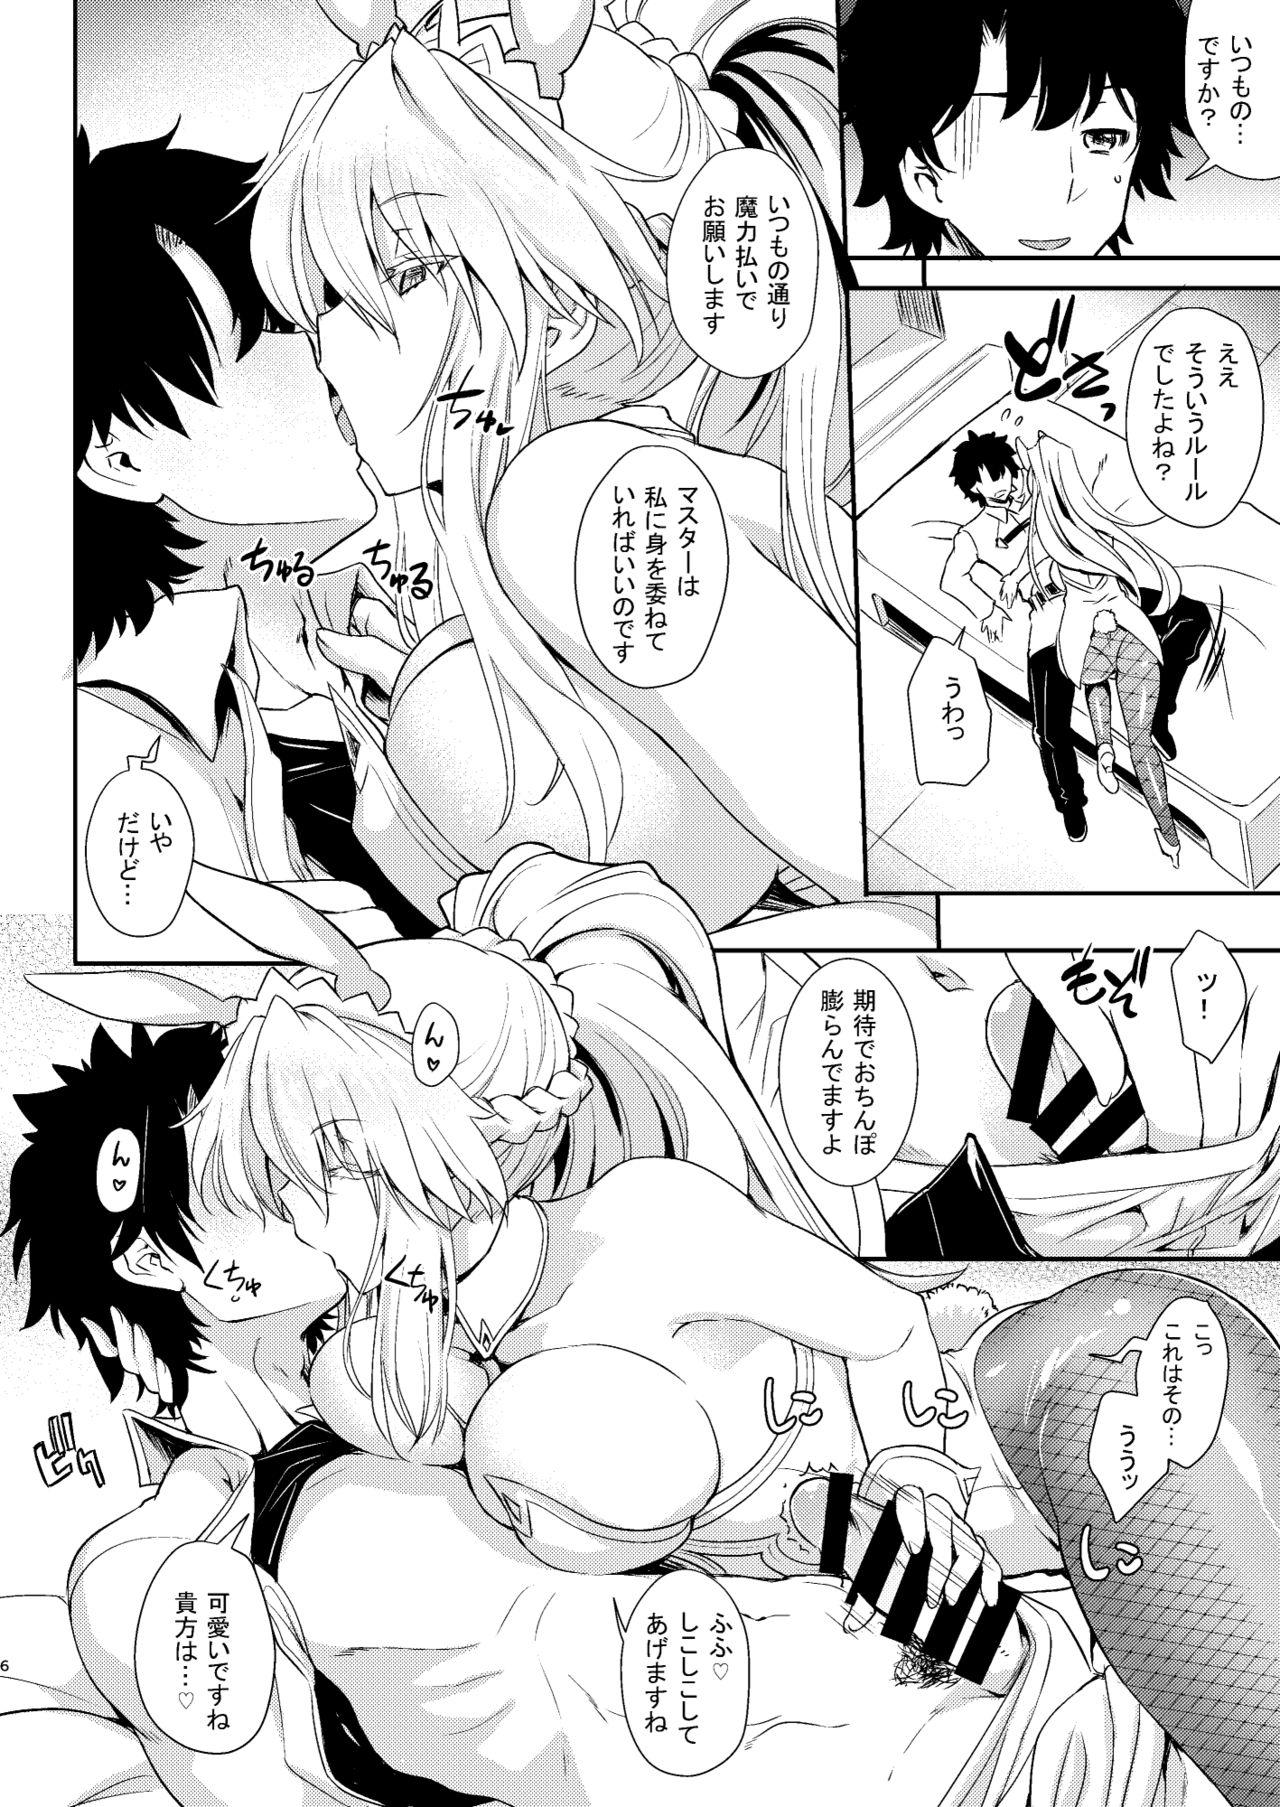 Blowjobs Place your bets please - Fate grand order Facial Cumshot - Page 6